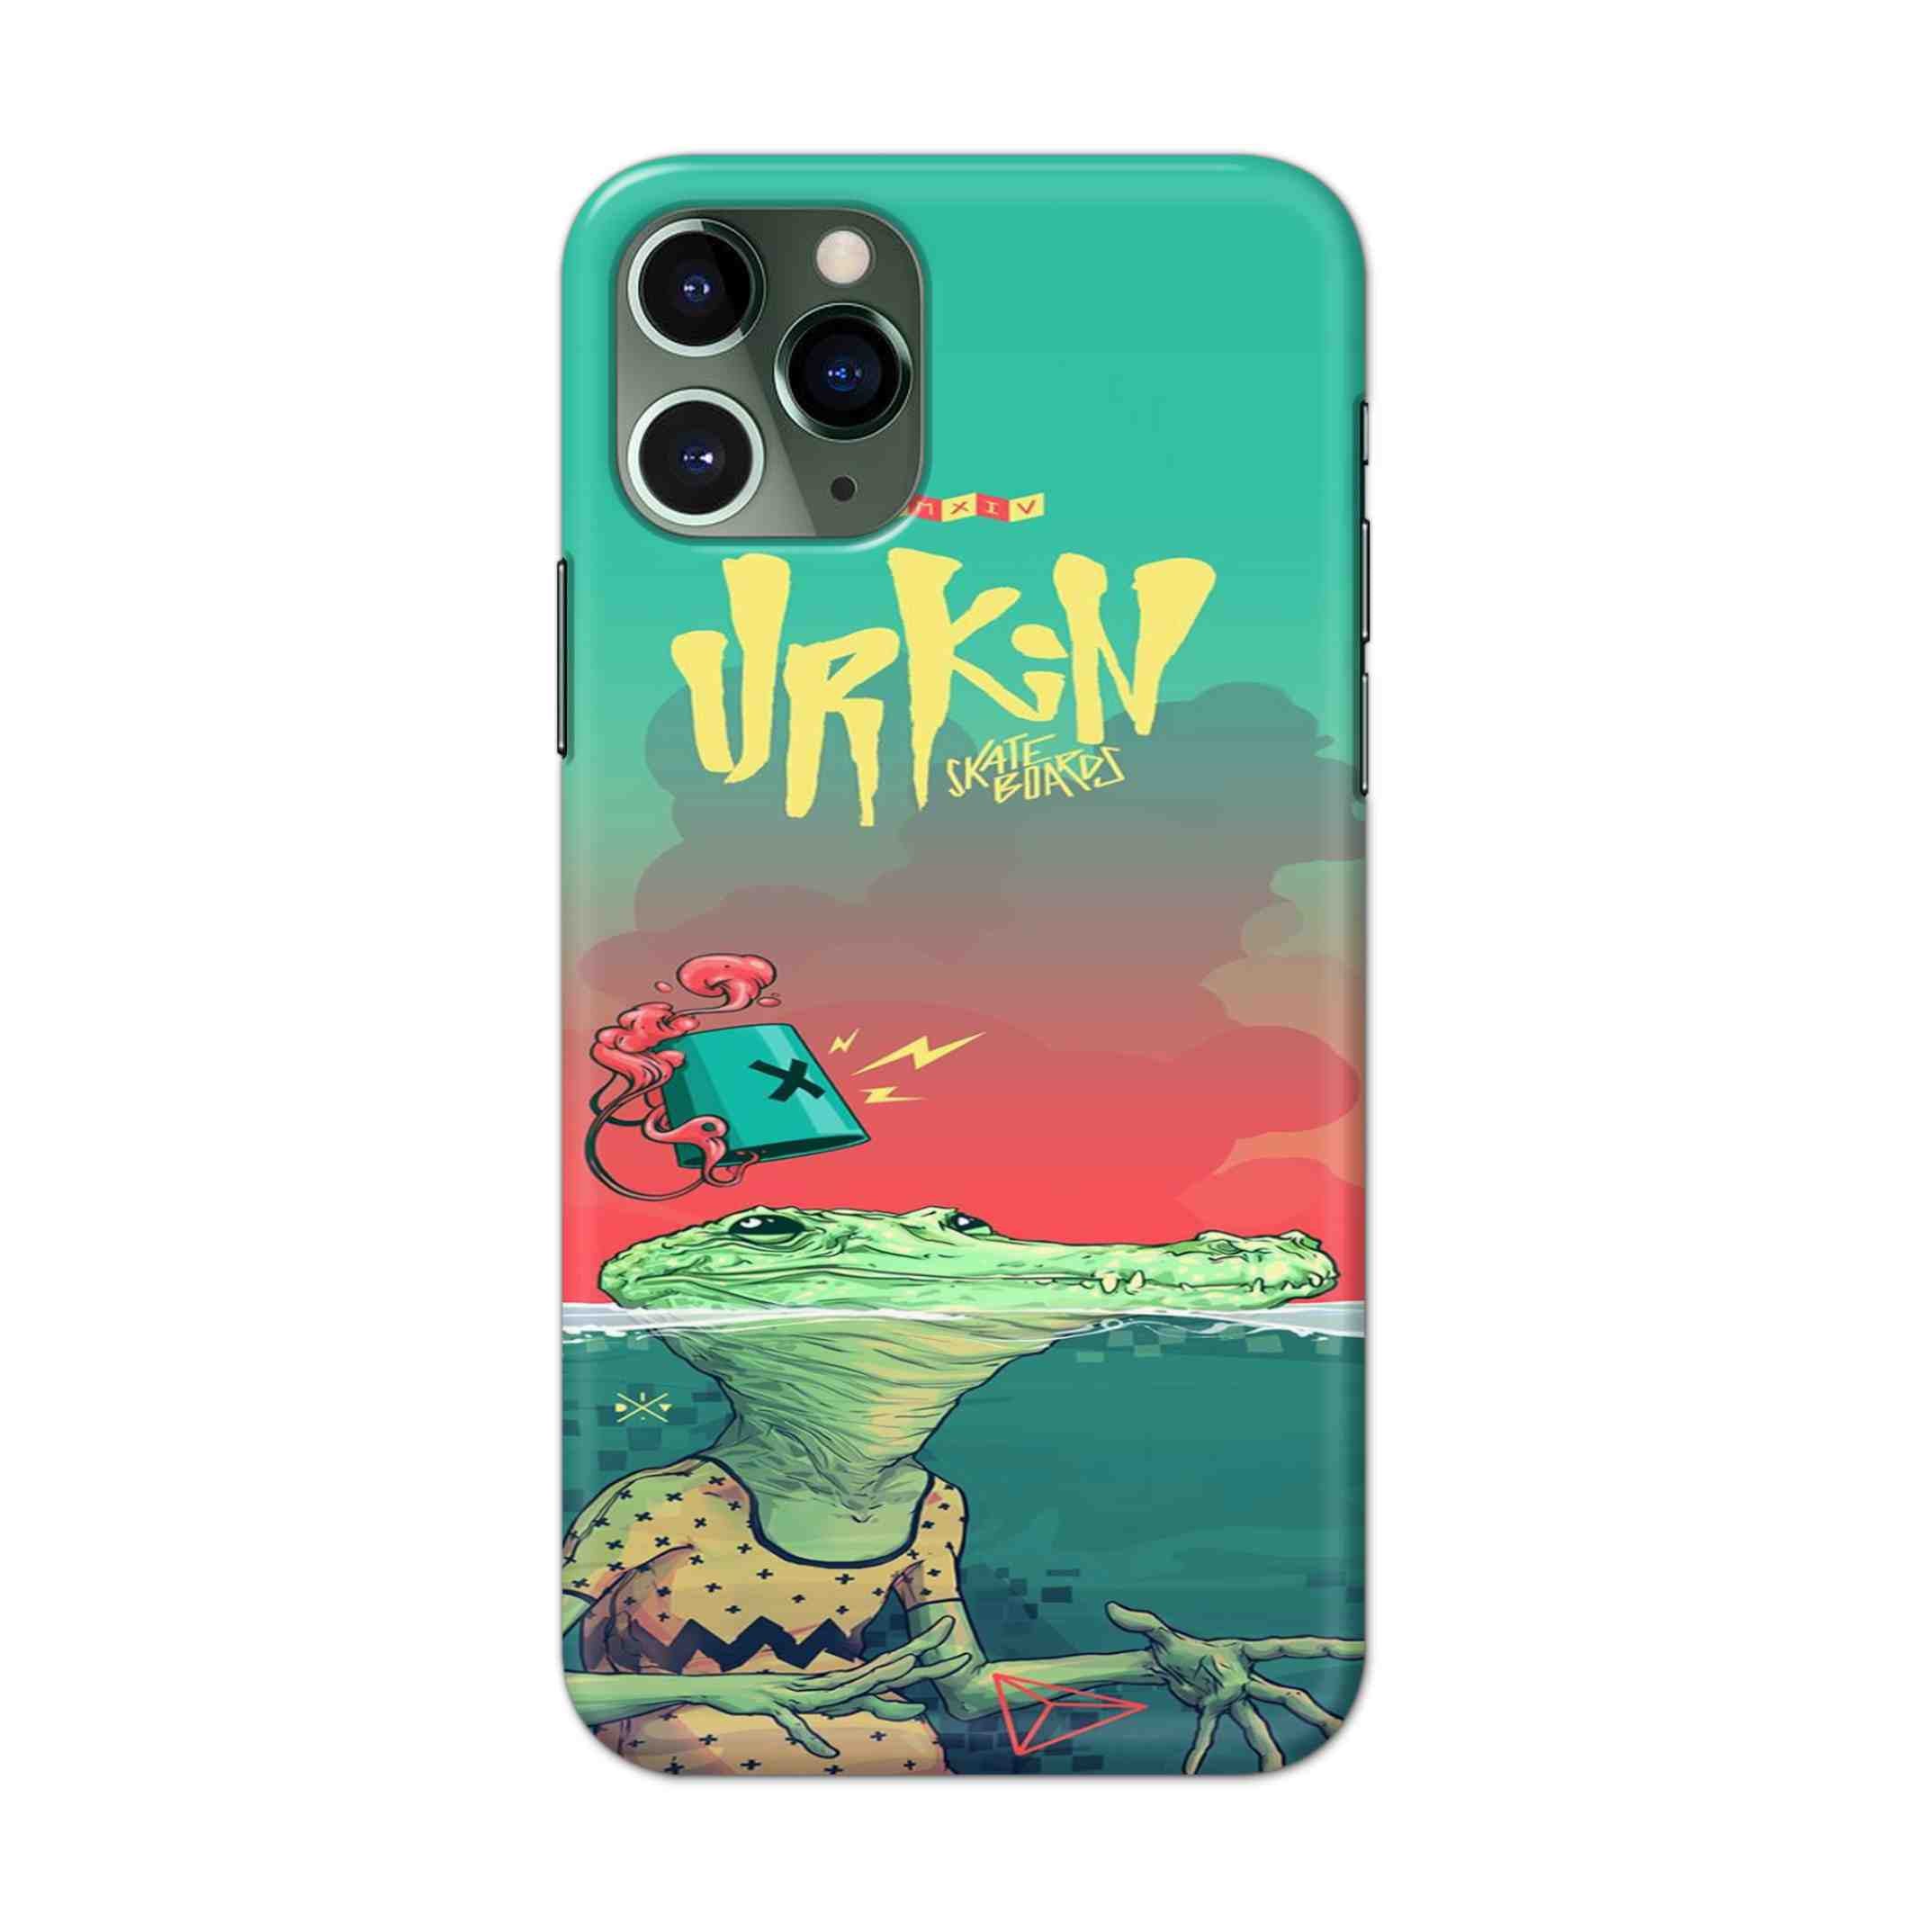 Buy Urkin Hard Back Mobile Phone Case/Cover For iPhone 11 Pro Online